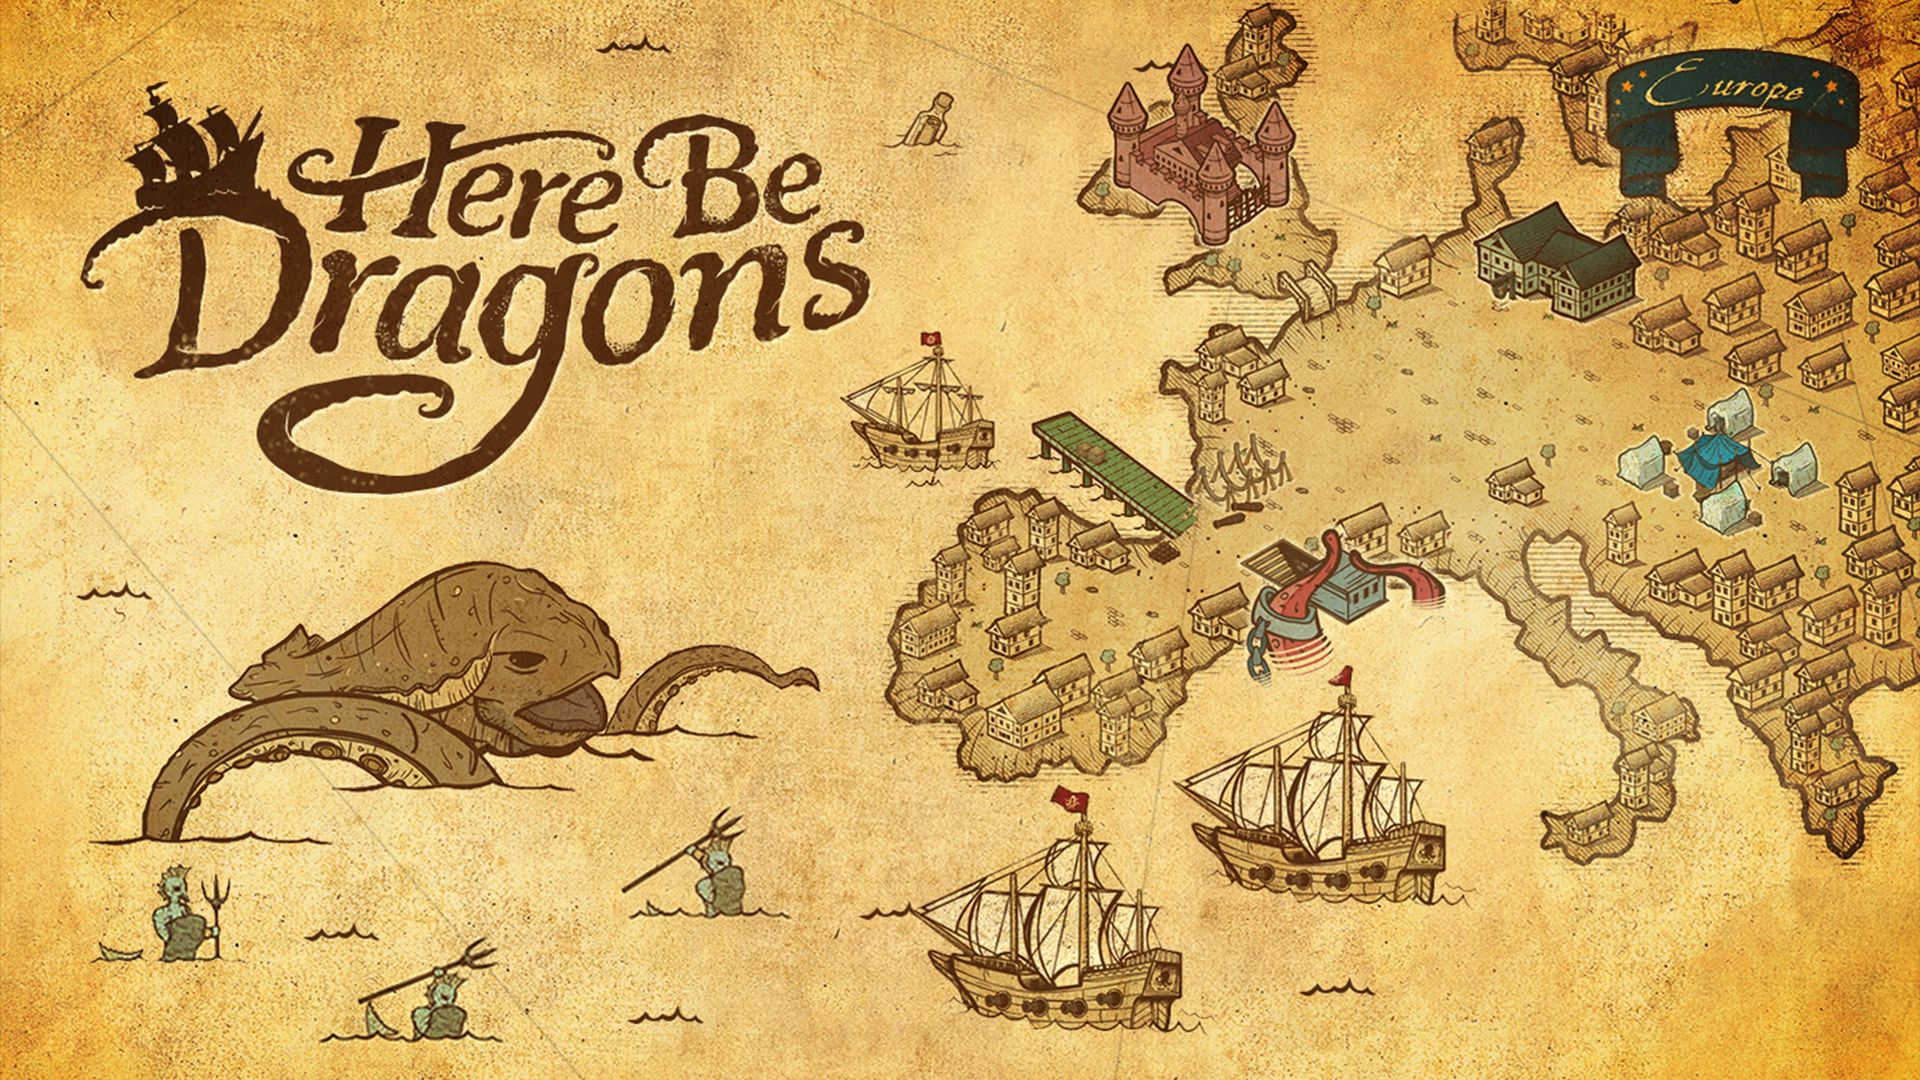 here be dragons an introduction to critical thinking